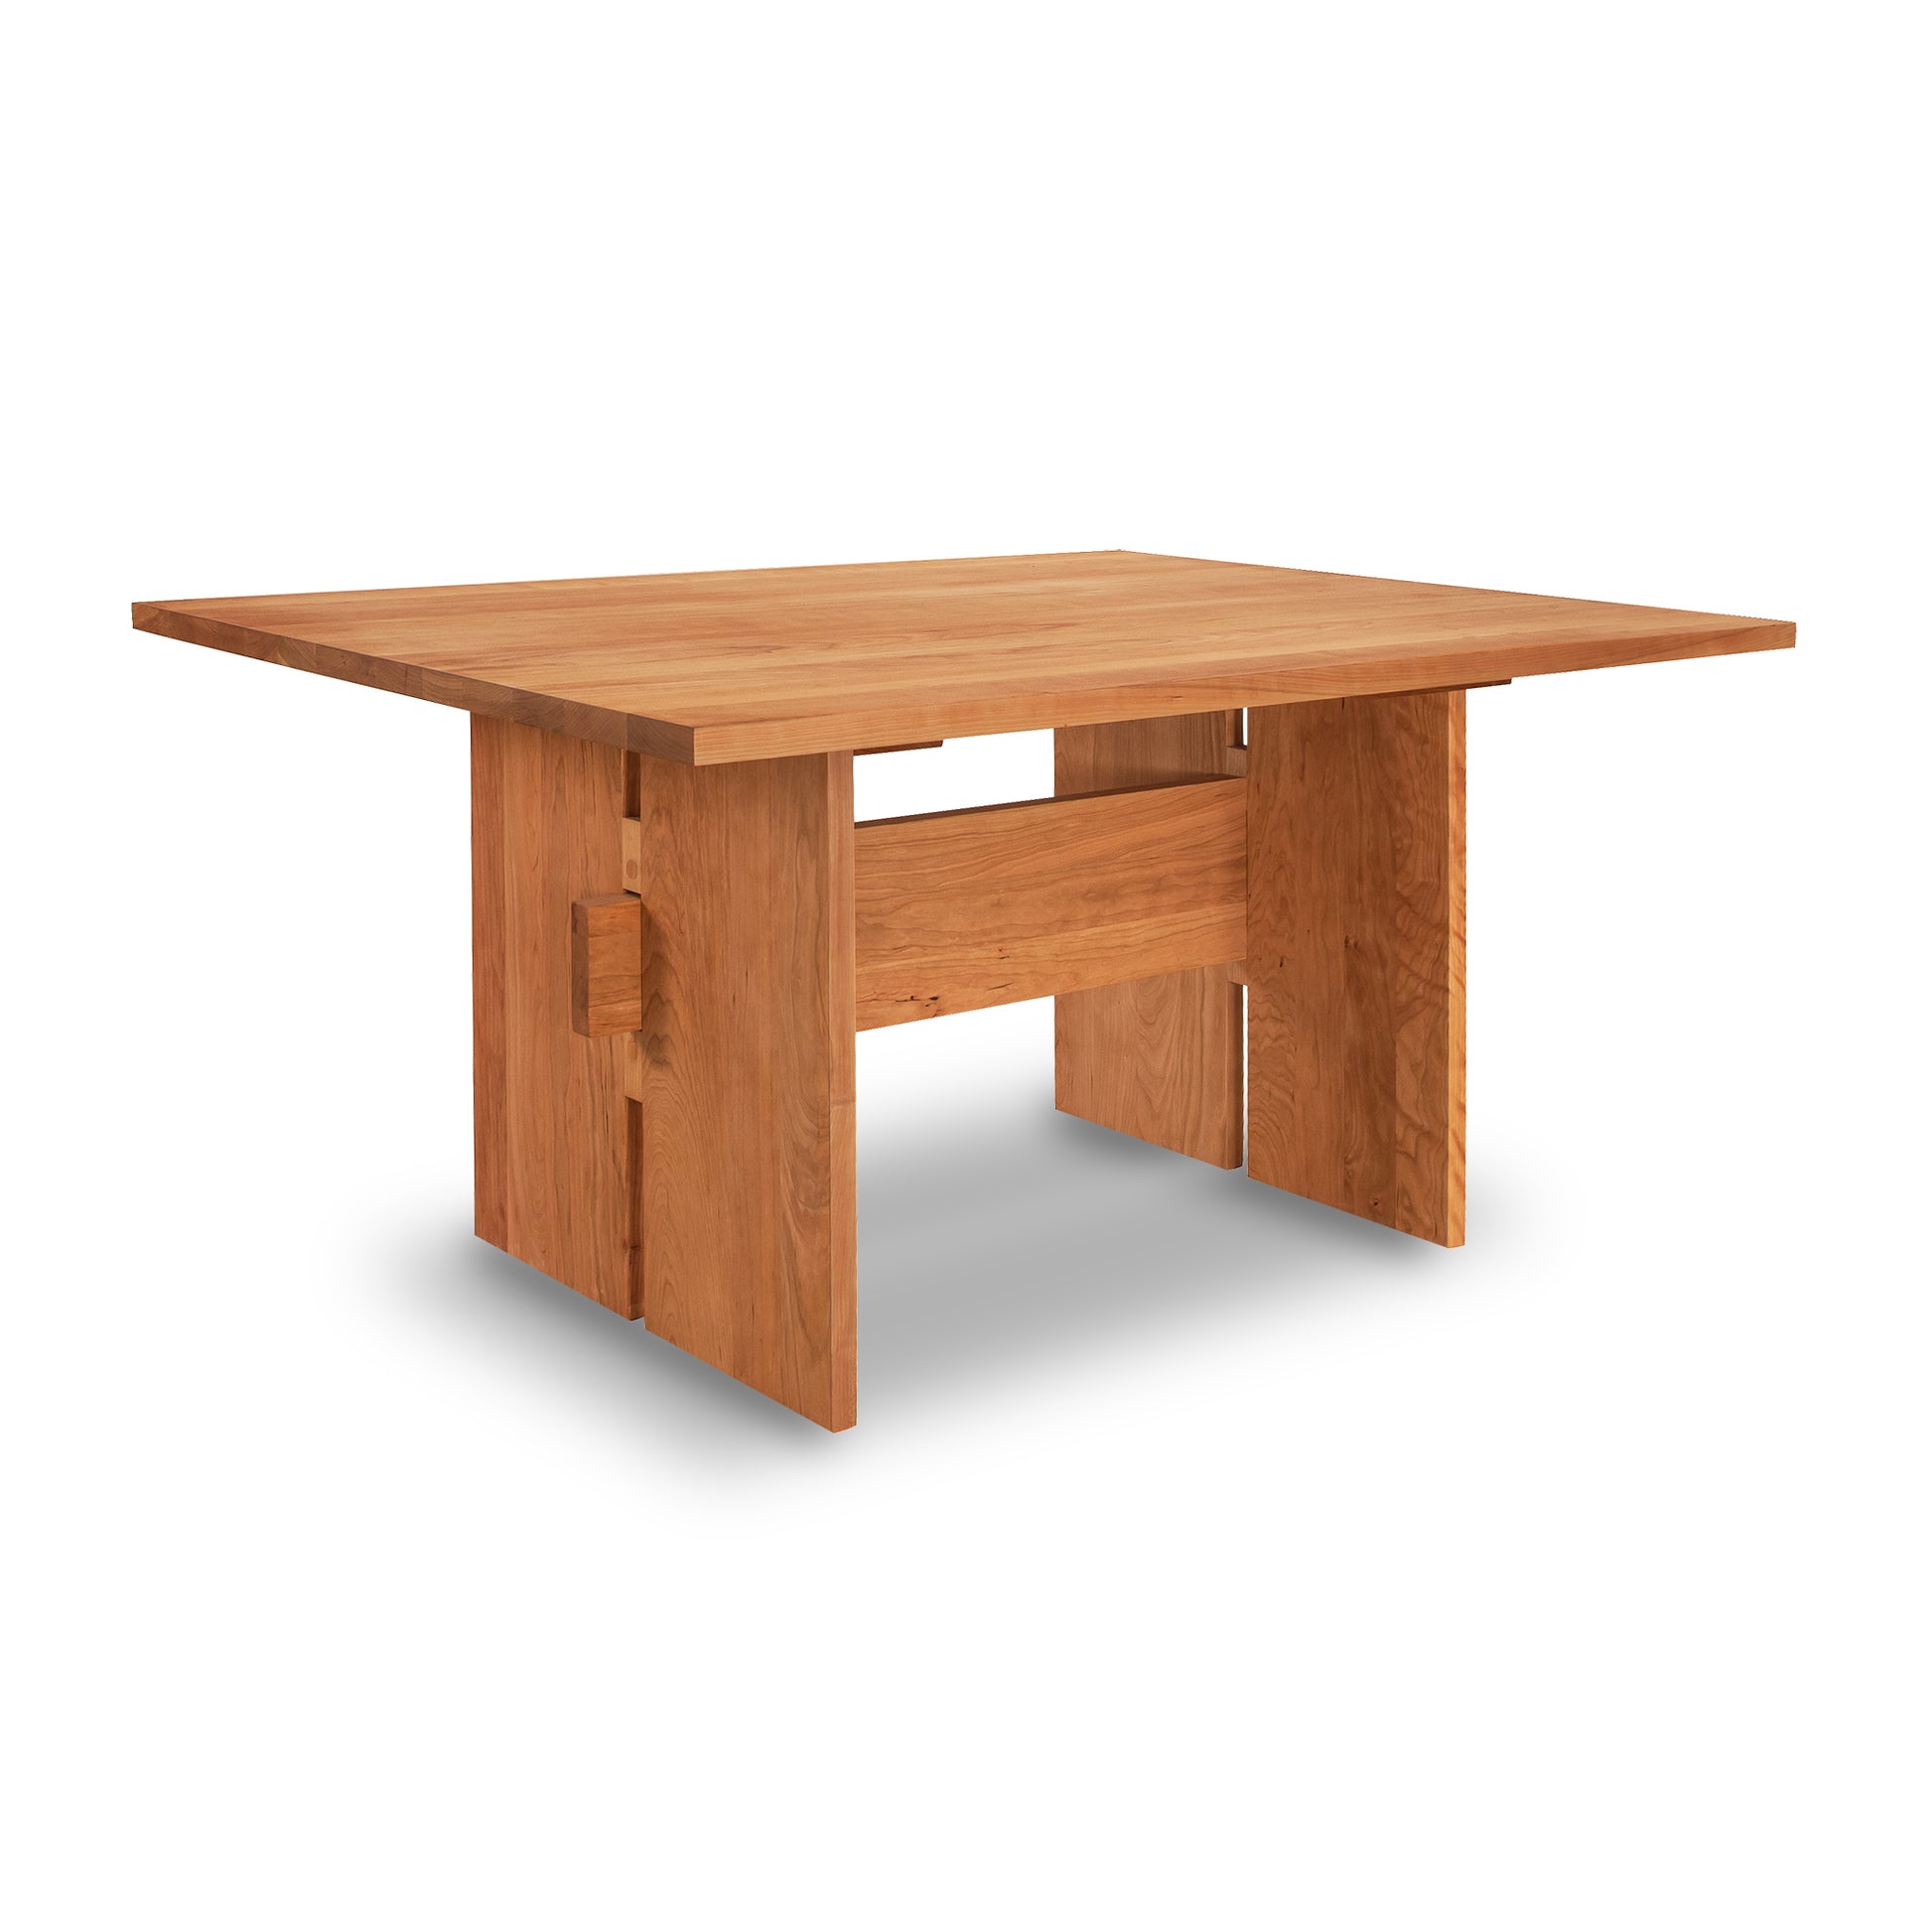 A high quality Modern American Dining Table from Vermont Furniture Designs with a square top and eco-friendly oil finish.